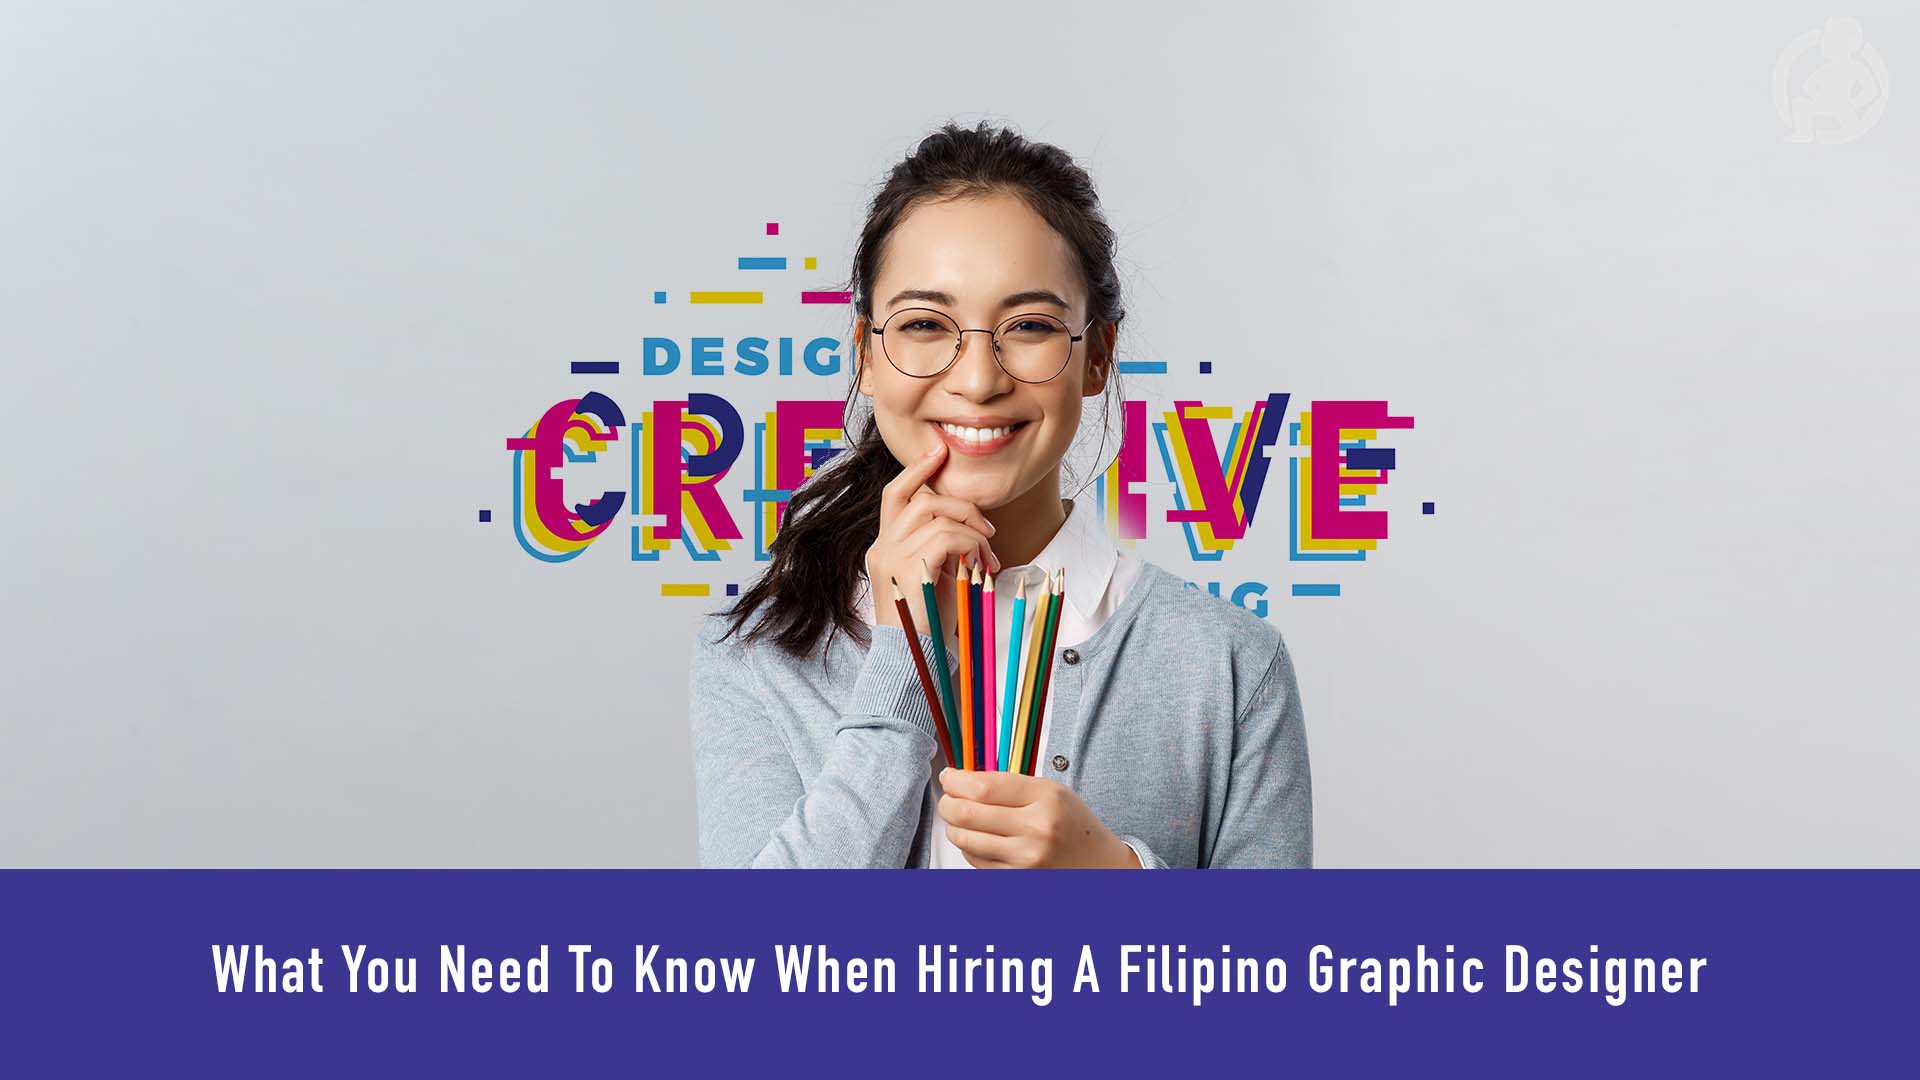 What You Need To Know When Hiring A Filipino Graphic Designer